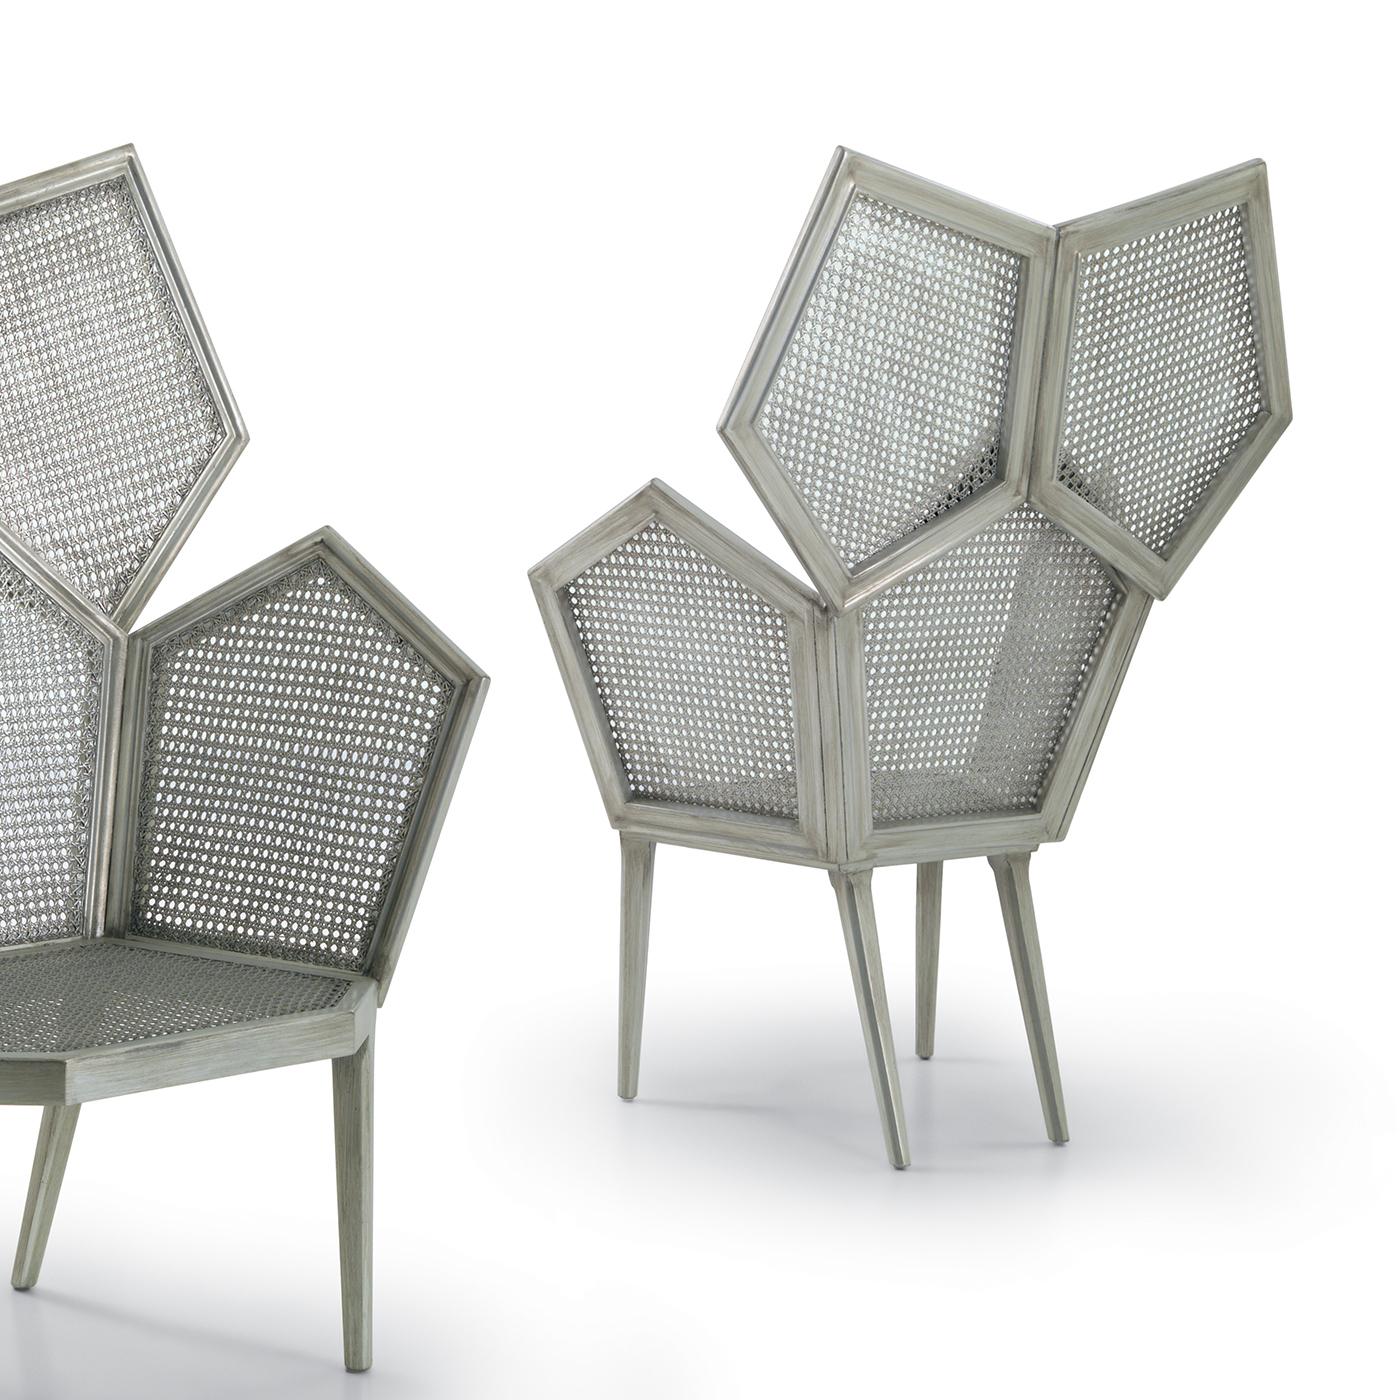 This stunning armchair is part of a series by Philippe Bestenheider that features a modular chair silhouette crafted of pentagonal elements. The wooden structure is finished with a lead leaf and comprises tapered legs with slanted back legs that